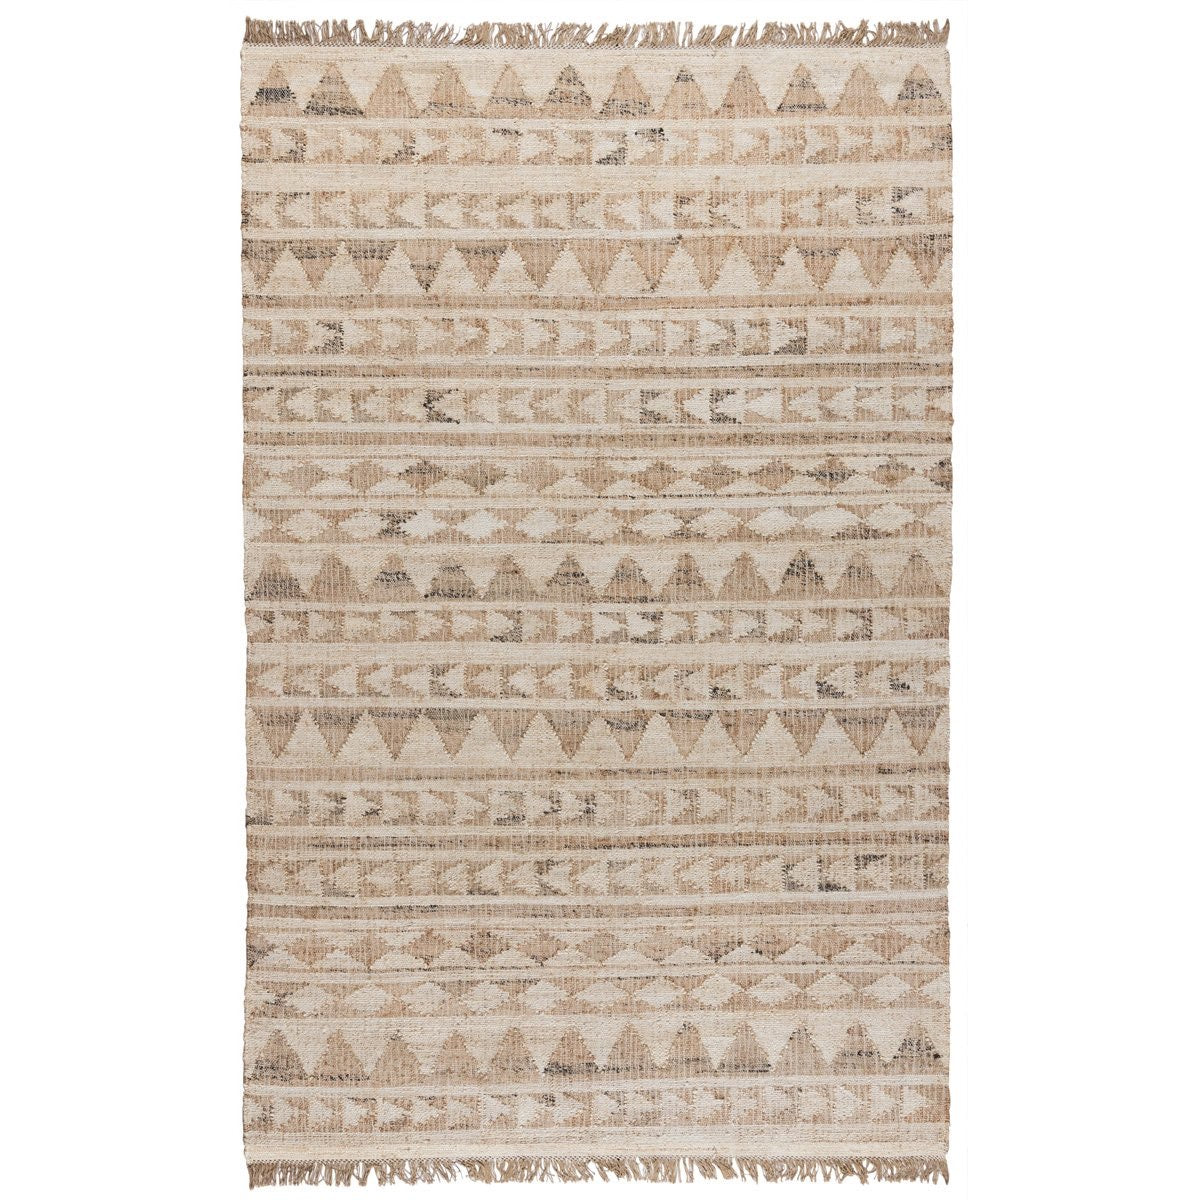 Solana Distressed Woven 2’6” x 8’ Runner Rug Ivory/Natural(1676RR)